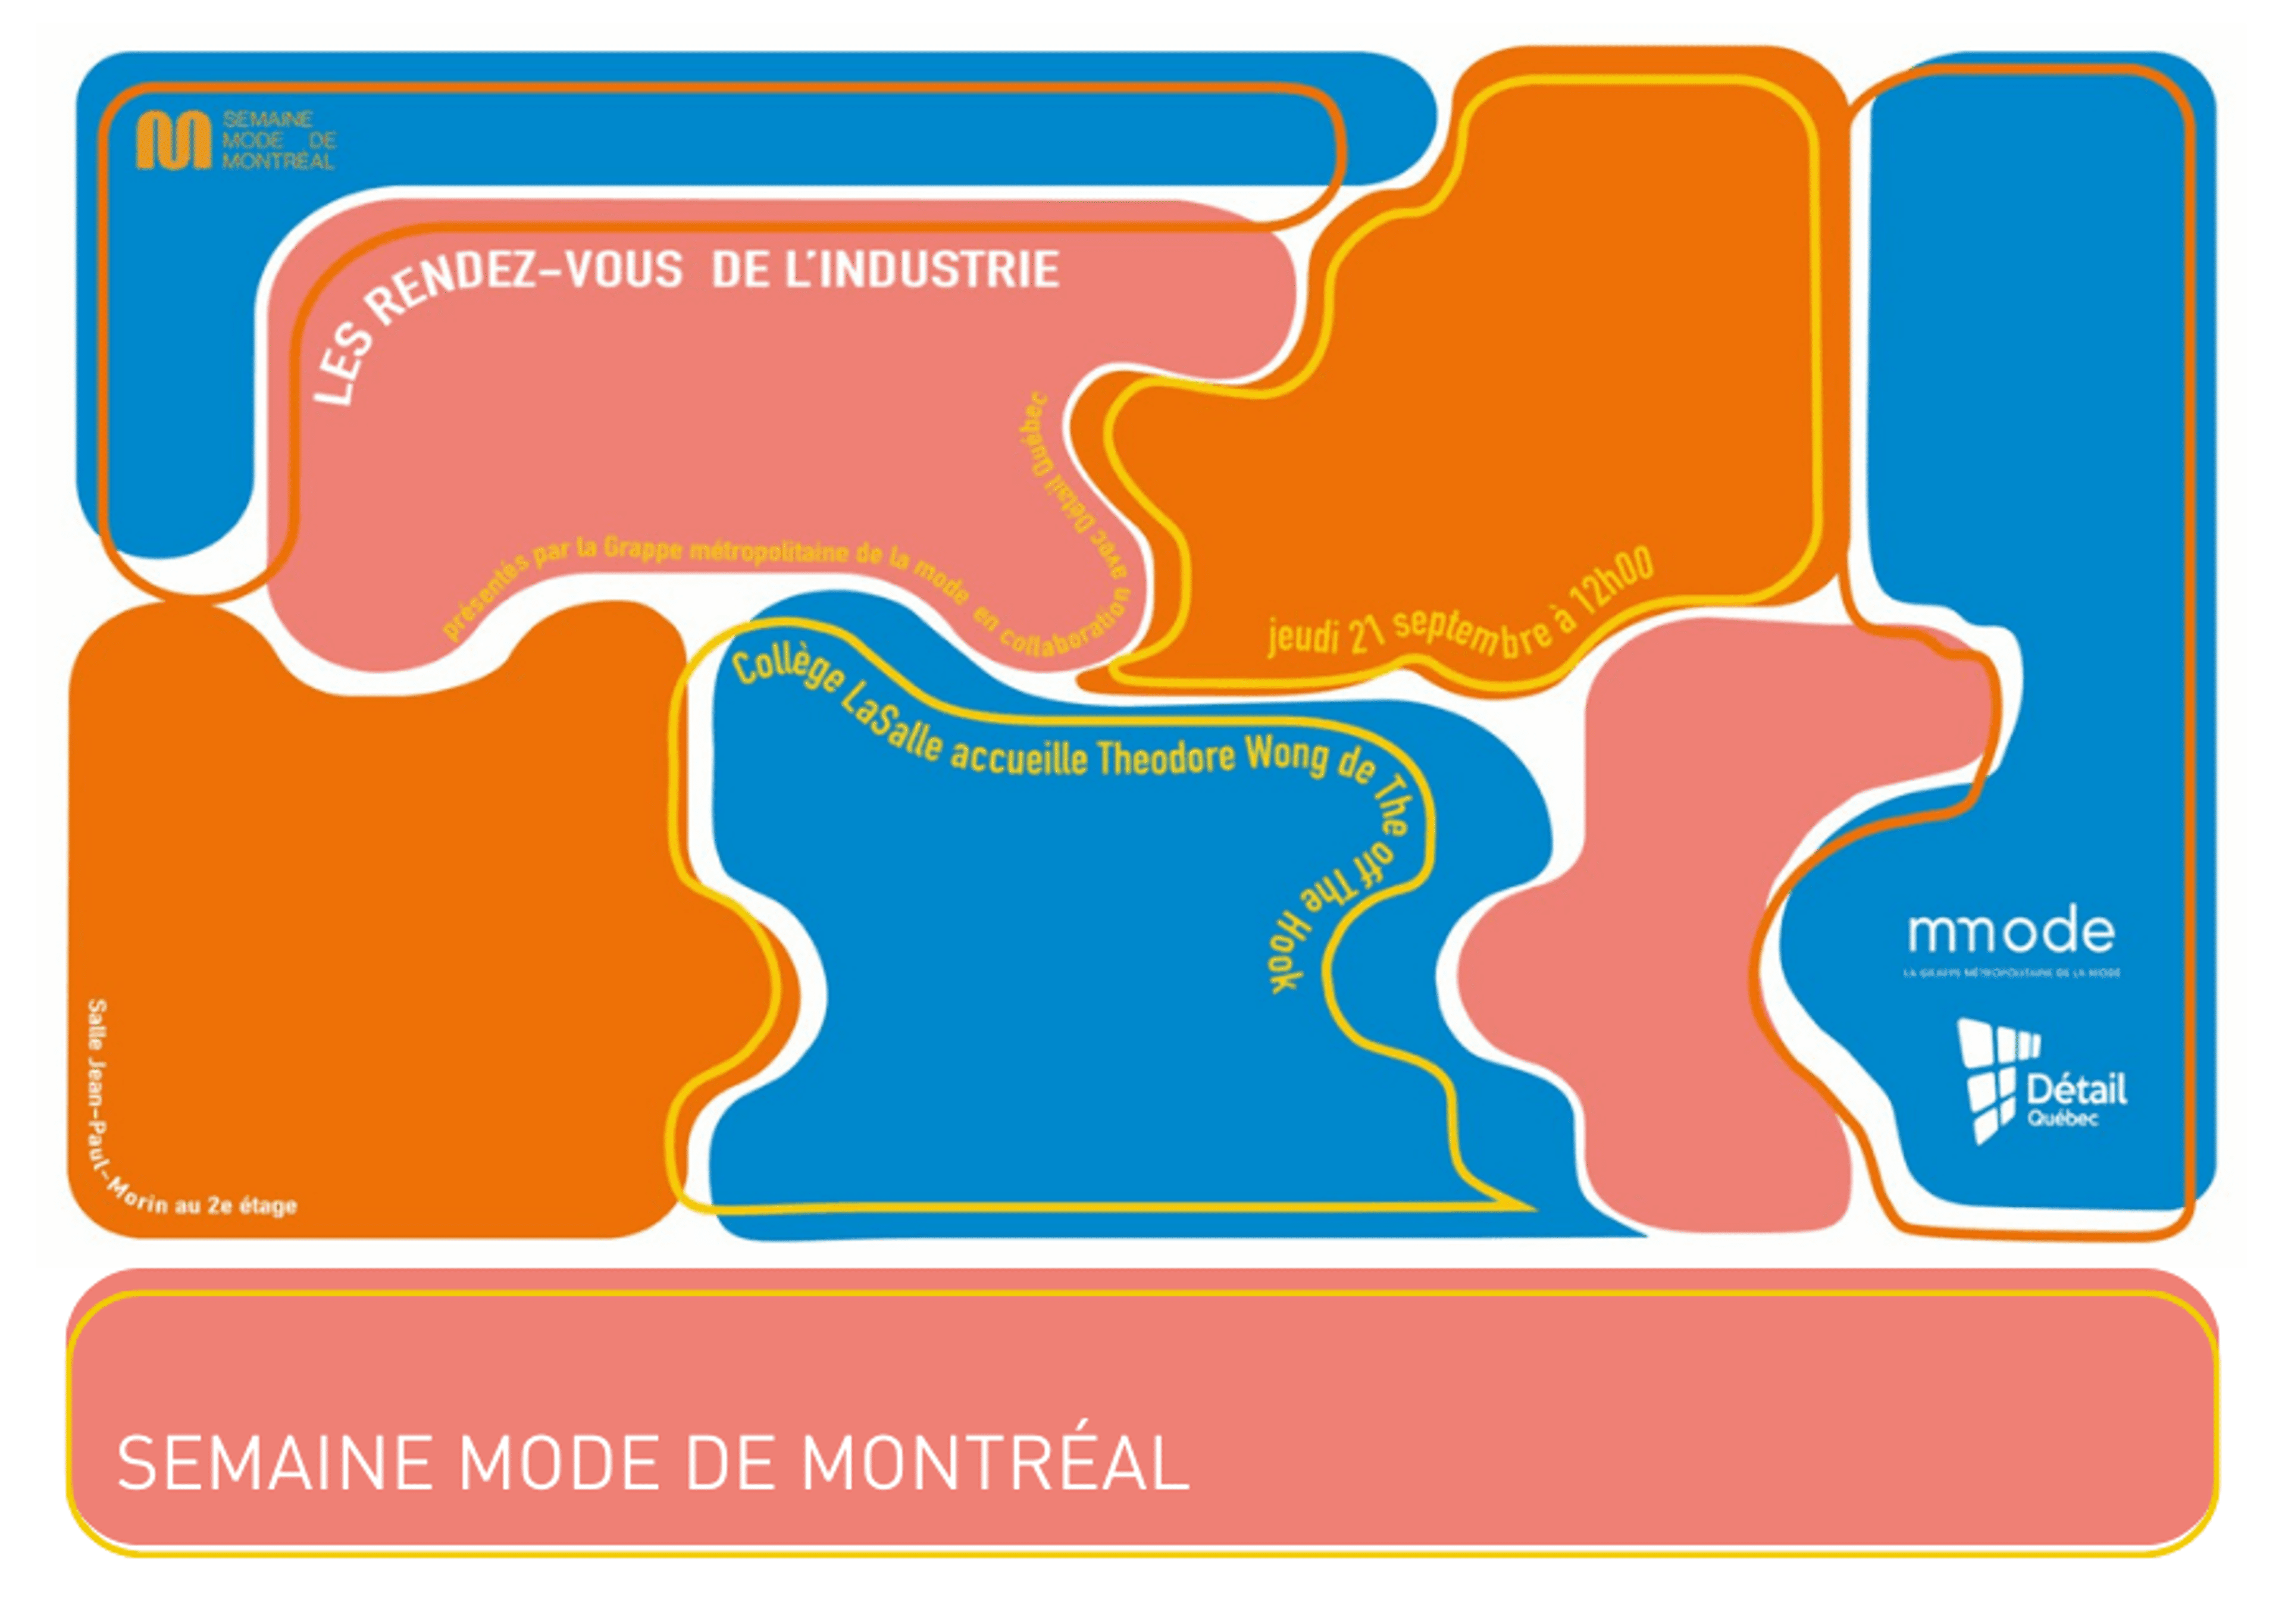 Colorful map layout for Montreal Fashion Week with event highlights and schedule details.